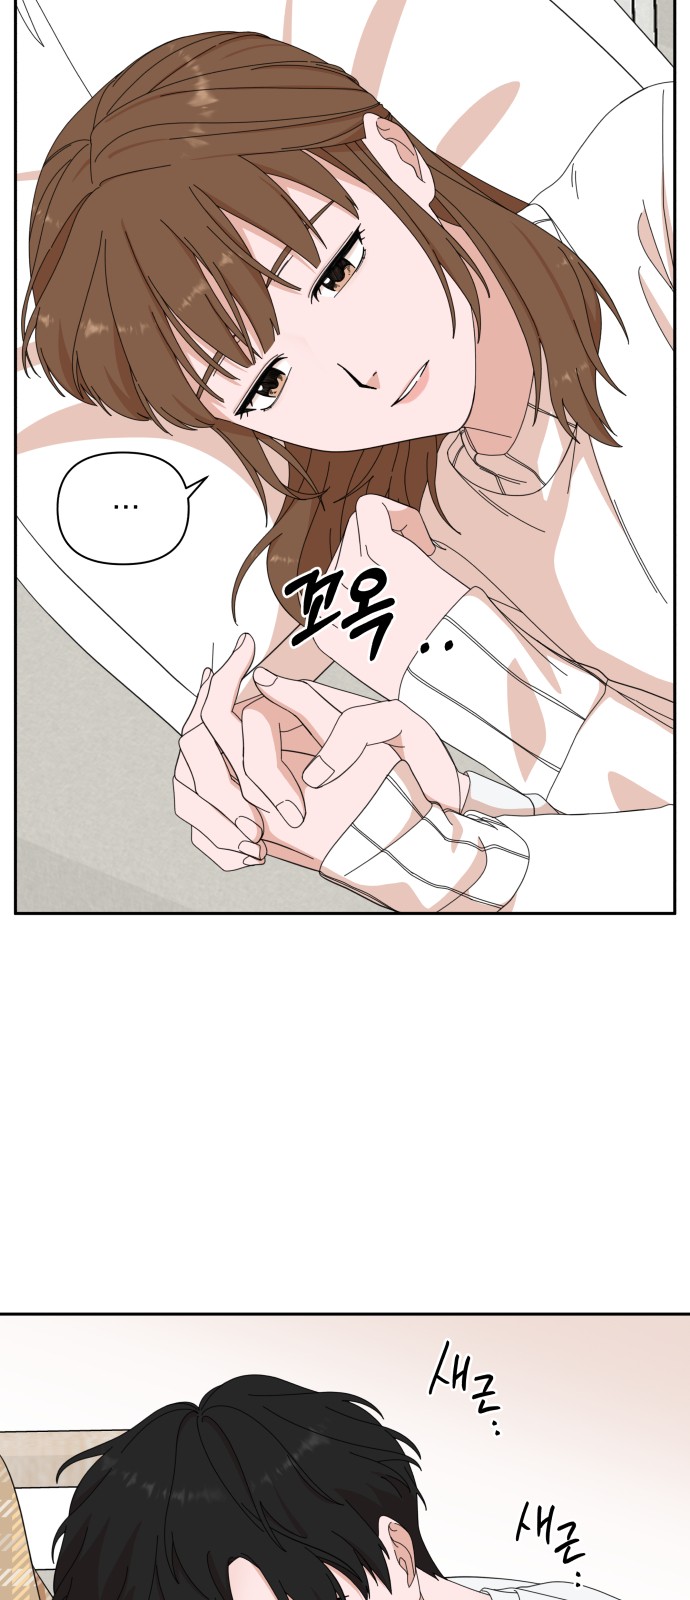 The Man With Pretty Lips - Chapter 7 - Page 3